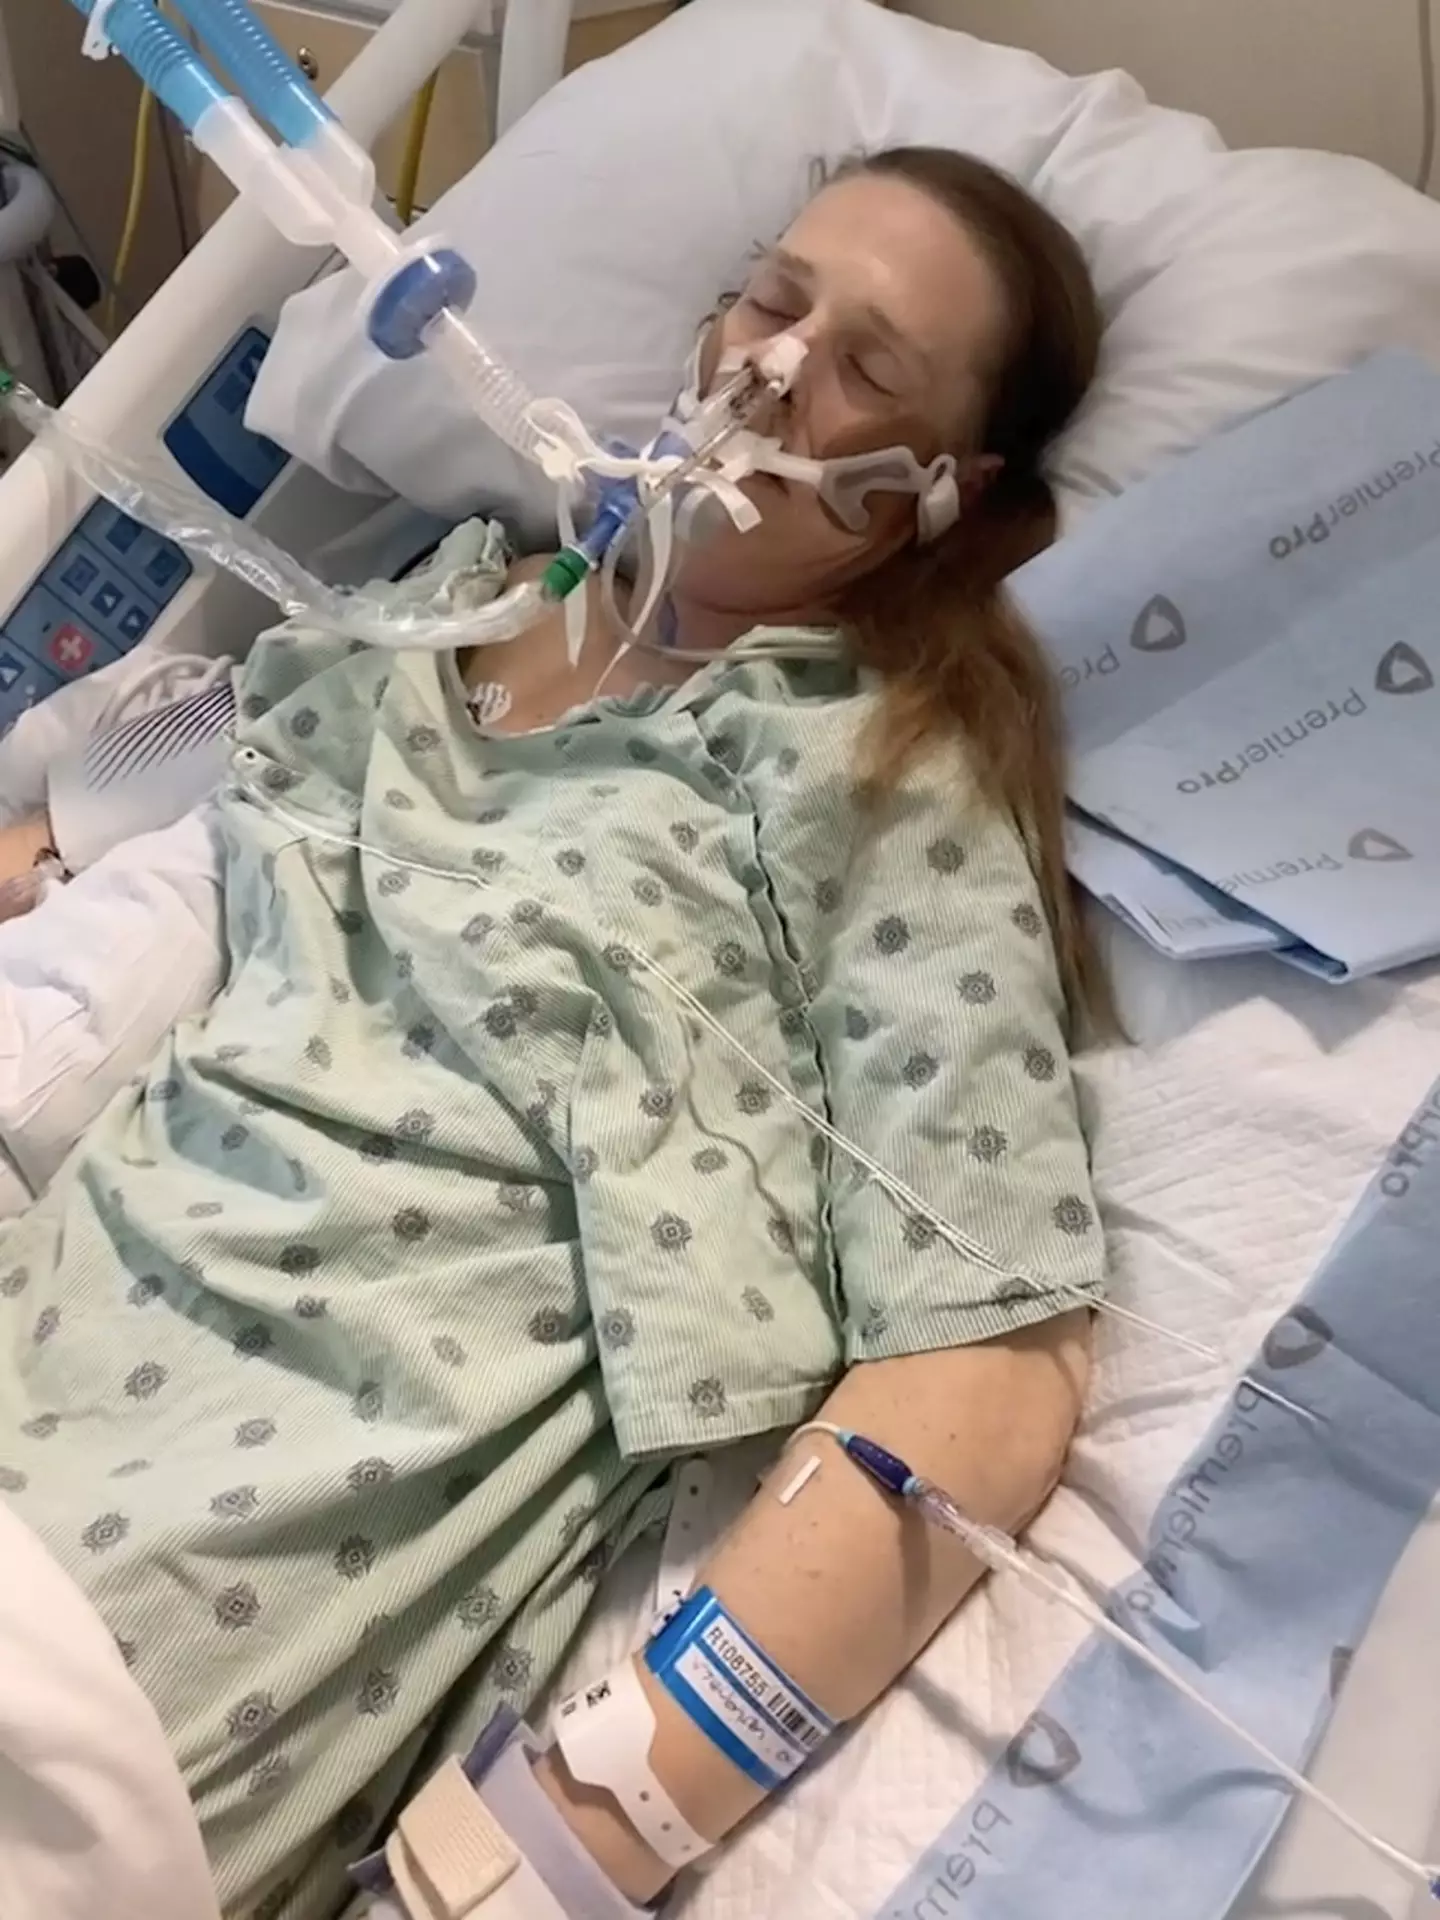 The accident resulted in Erin being placed on life support.